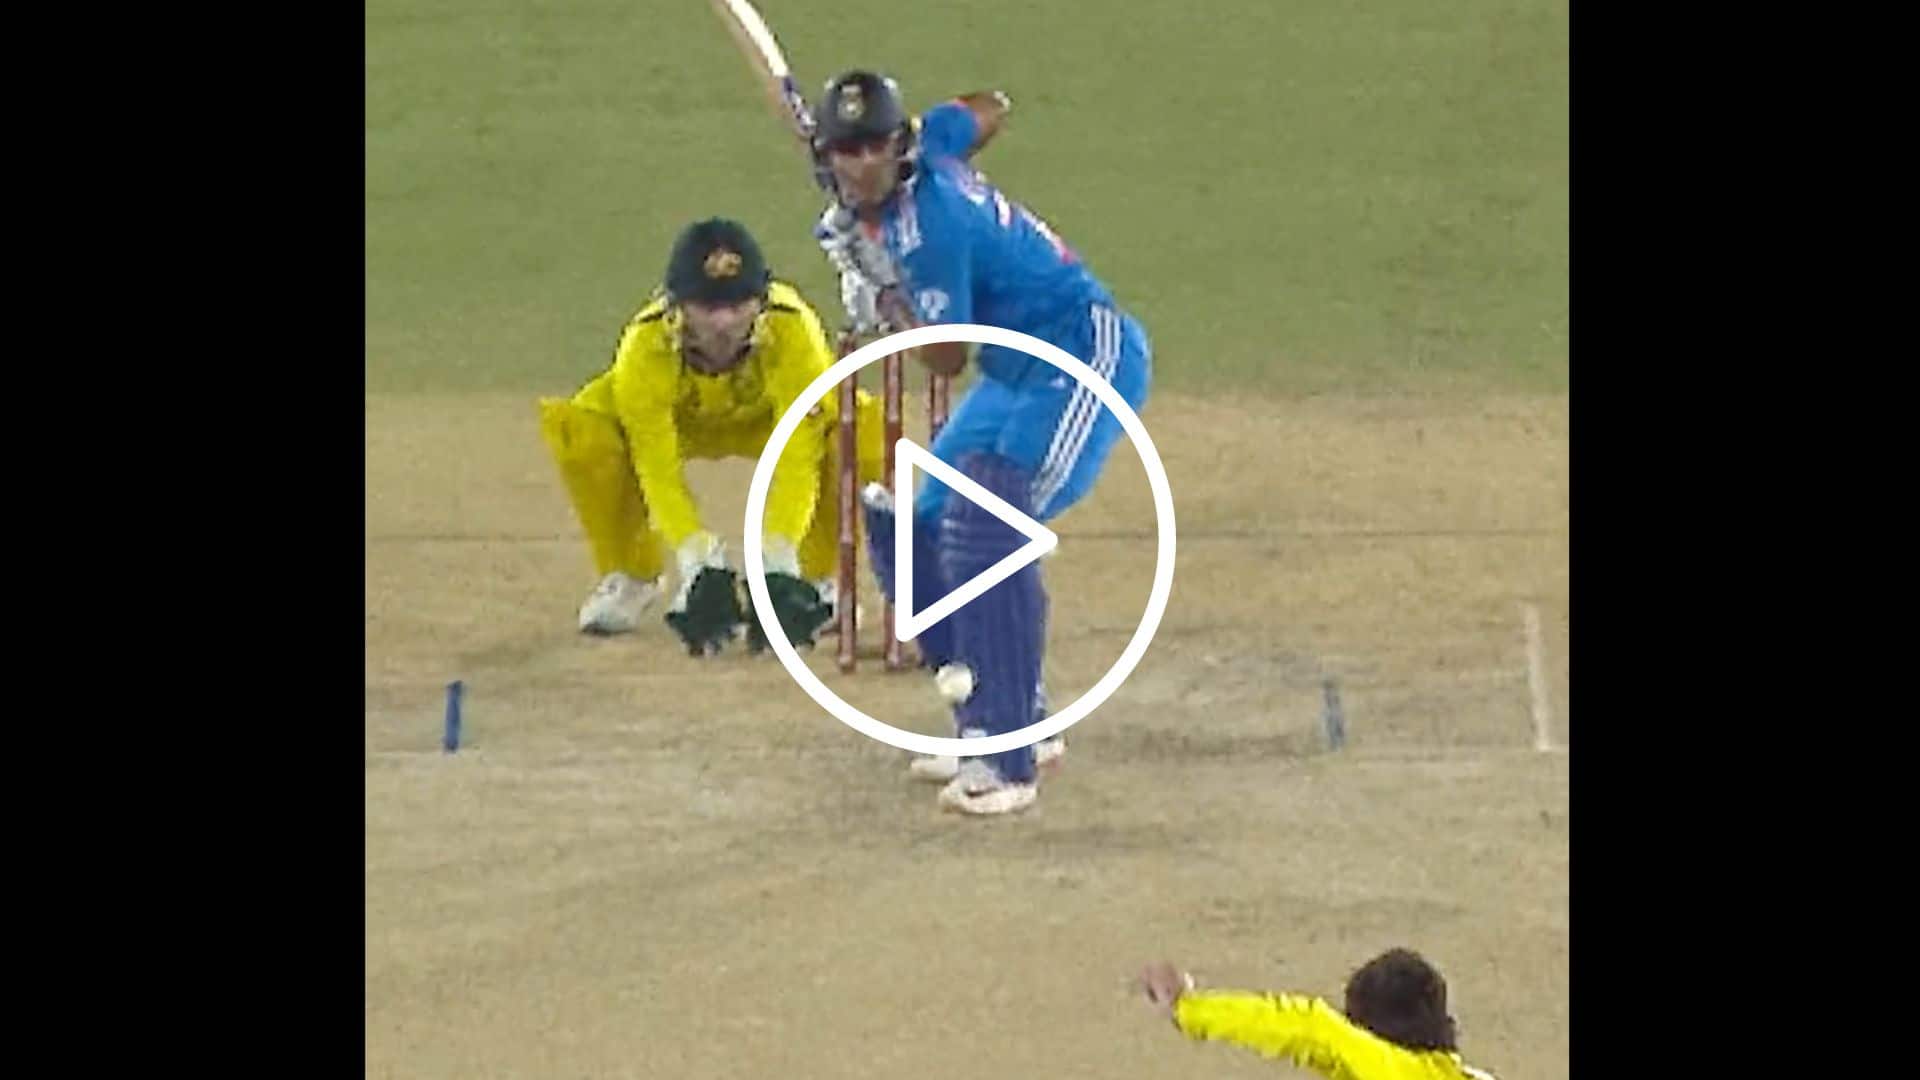 [Watch] Shubman Gill Slams A Classy Six To Get To His Belligerent Fifty vs AUS